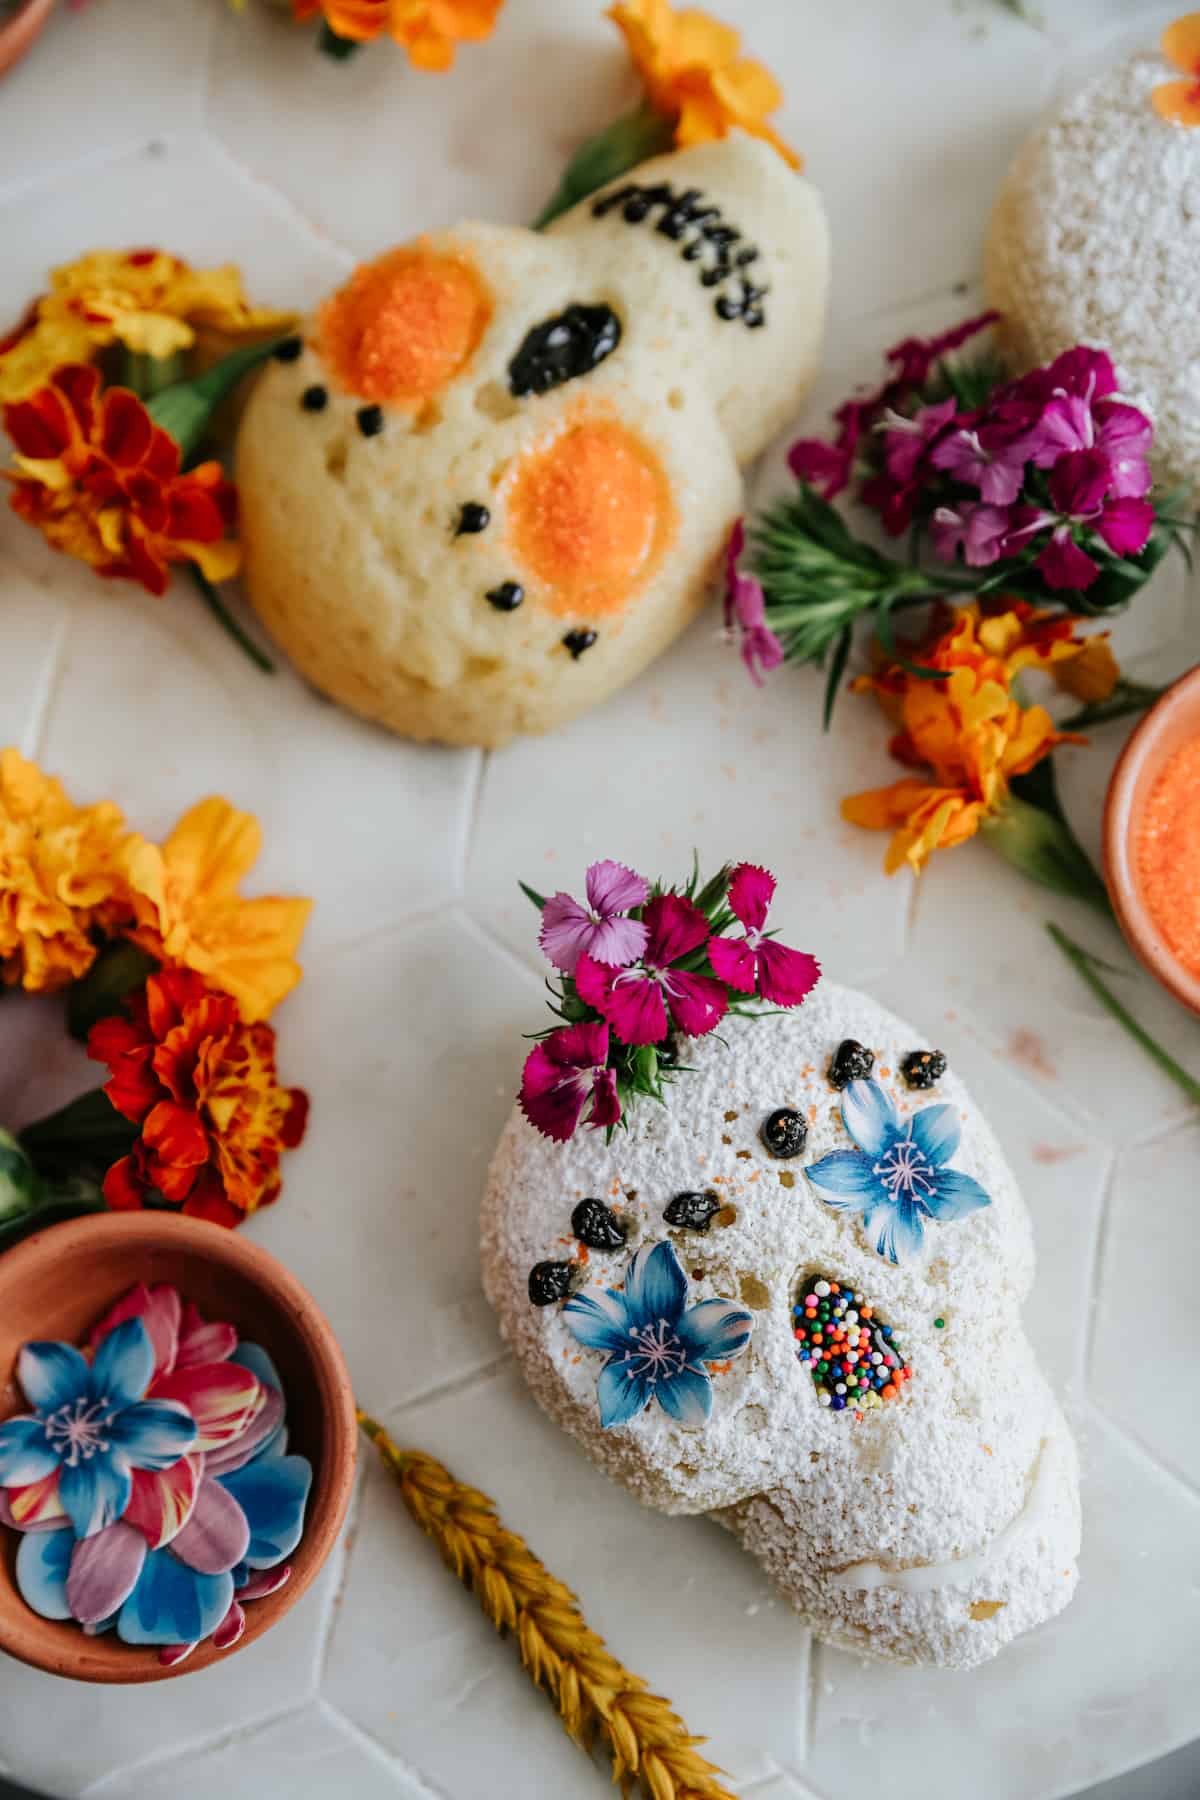 close up on a lemon skull cake dusted with powdered sugar and decorated with blue flowers for eyes and sprinkles for a nose with edible purple flowers as a crown.